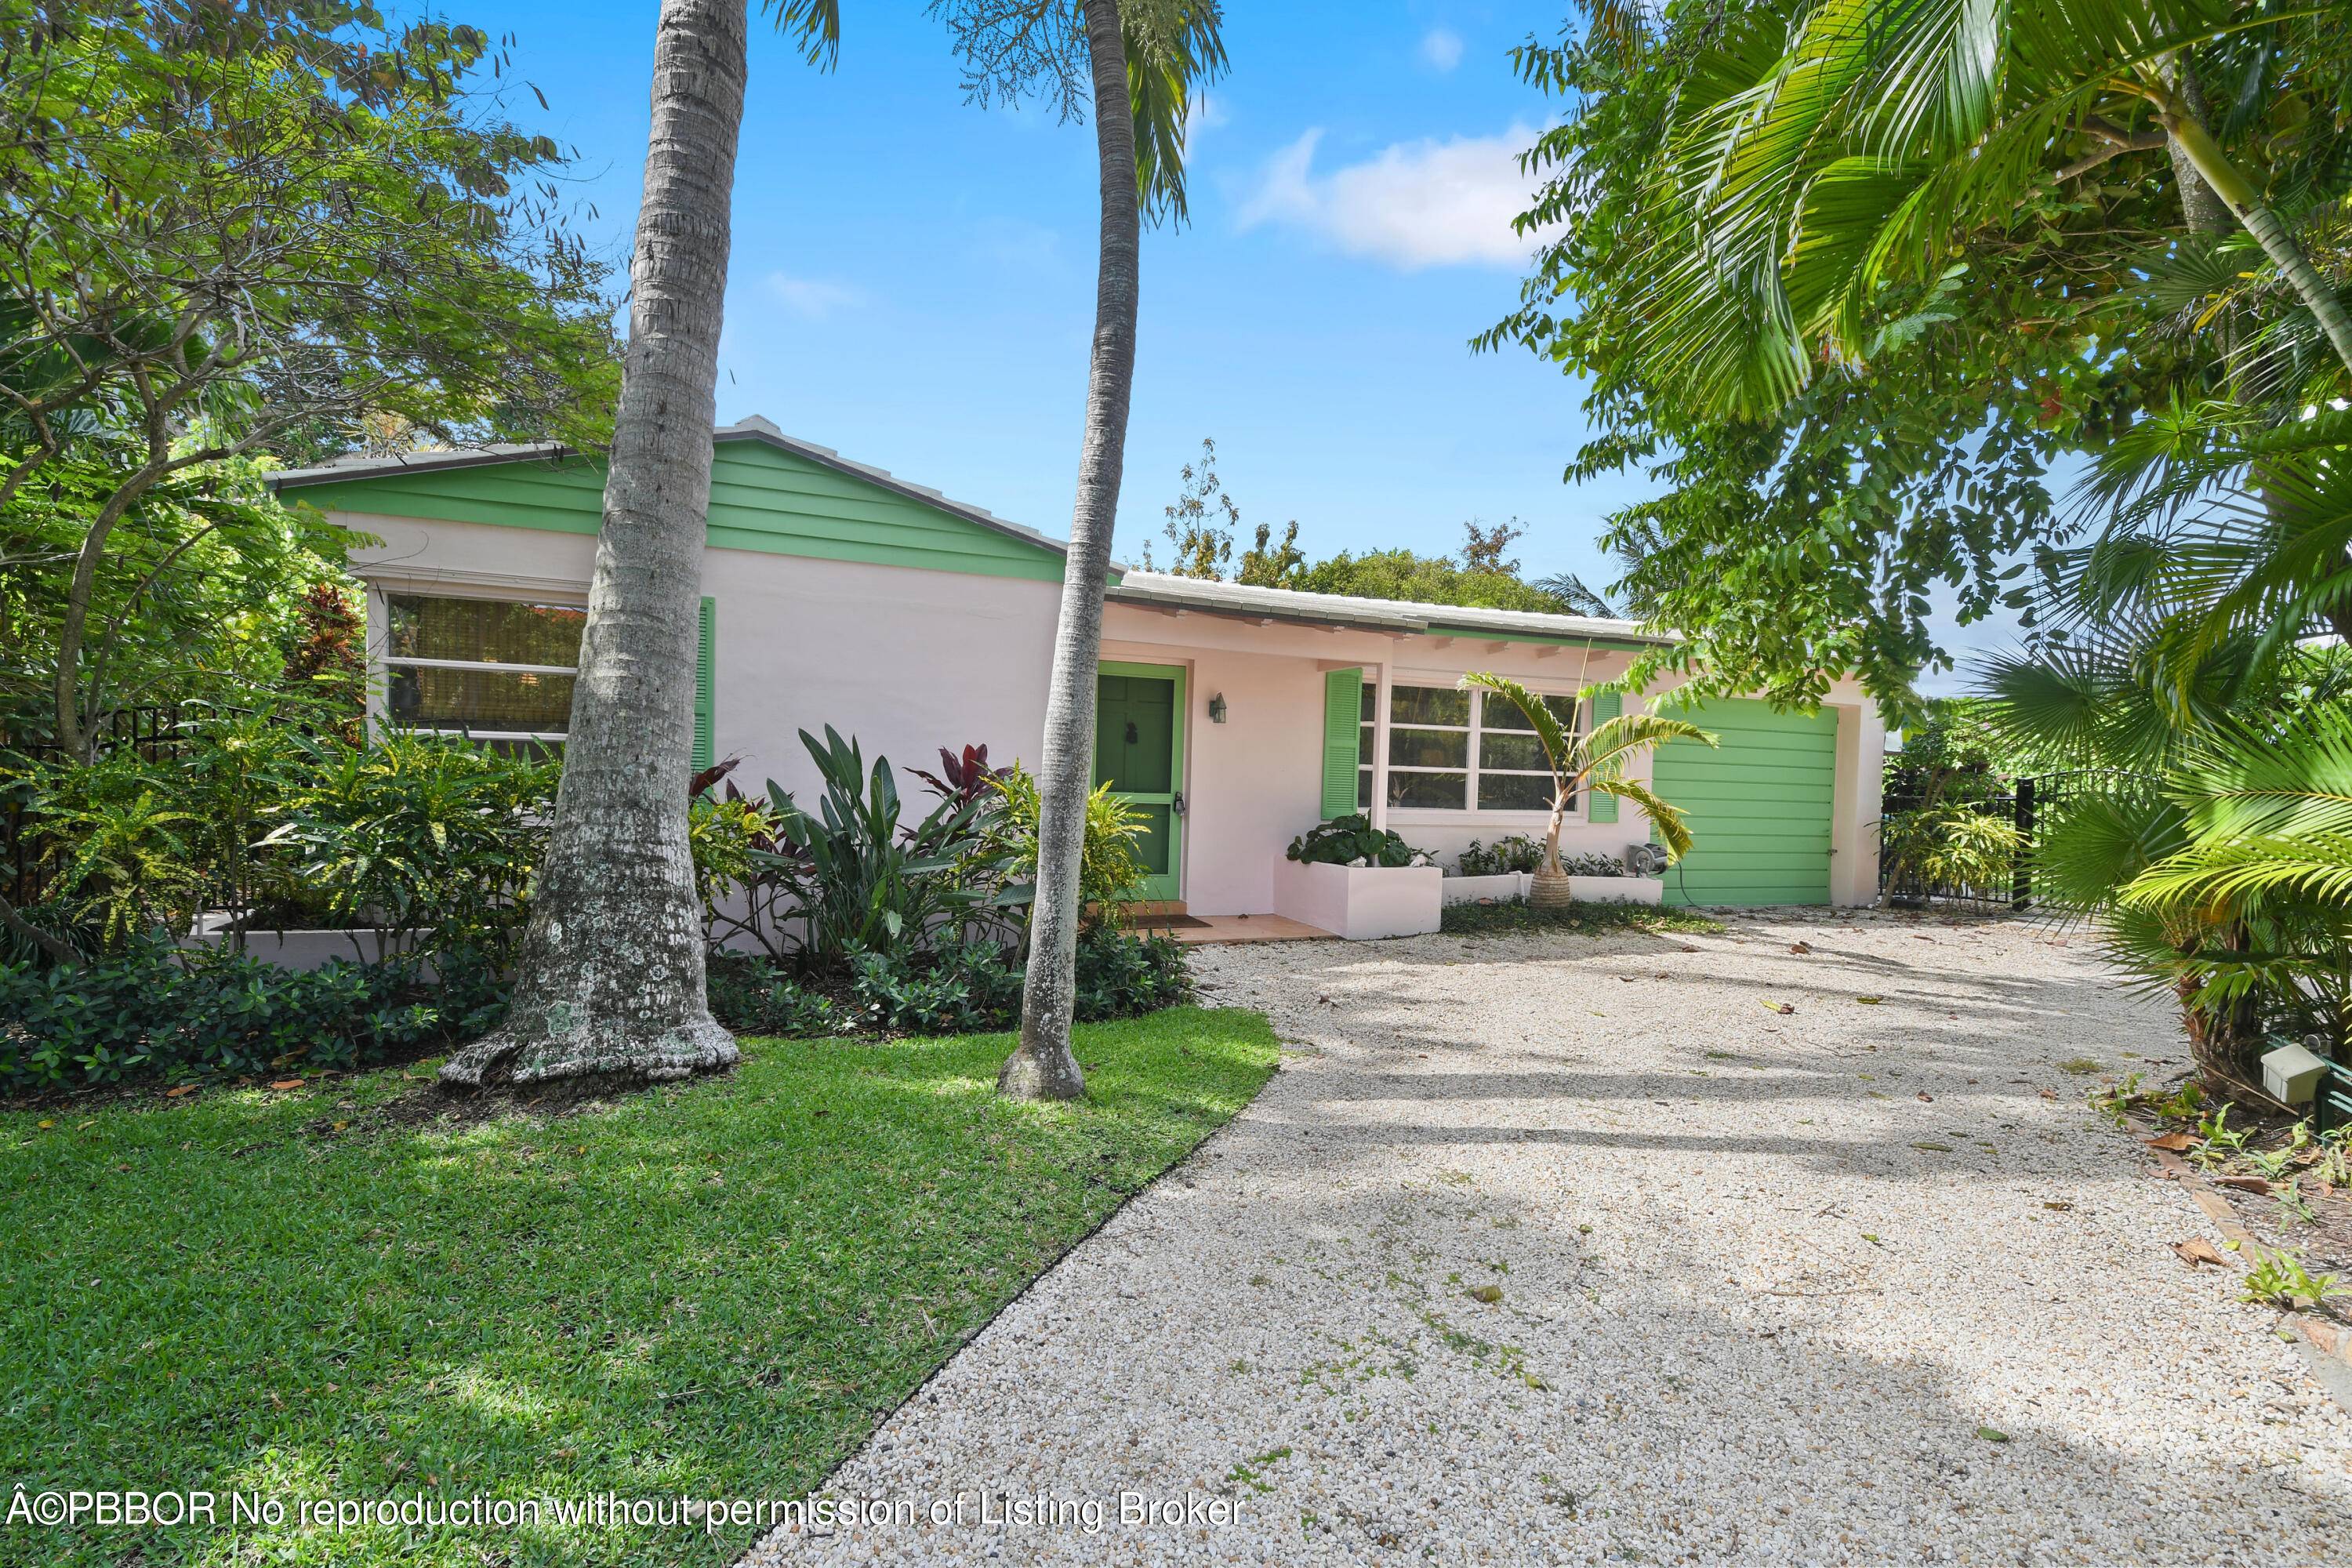 This quintessential Palm Beach Bungalow represents a singular opportunity on one of Palm Beach Island's most idyllic North End lanes.